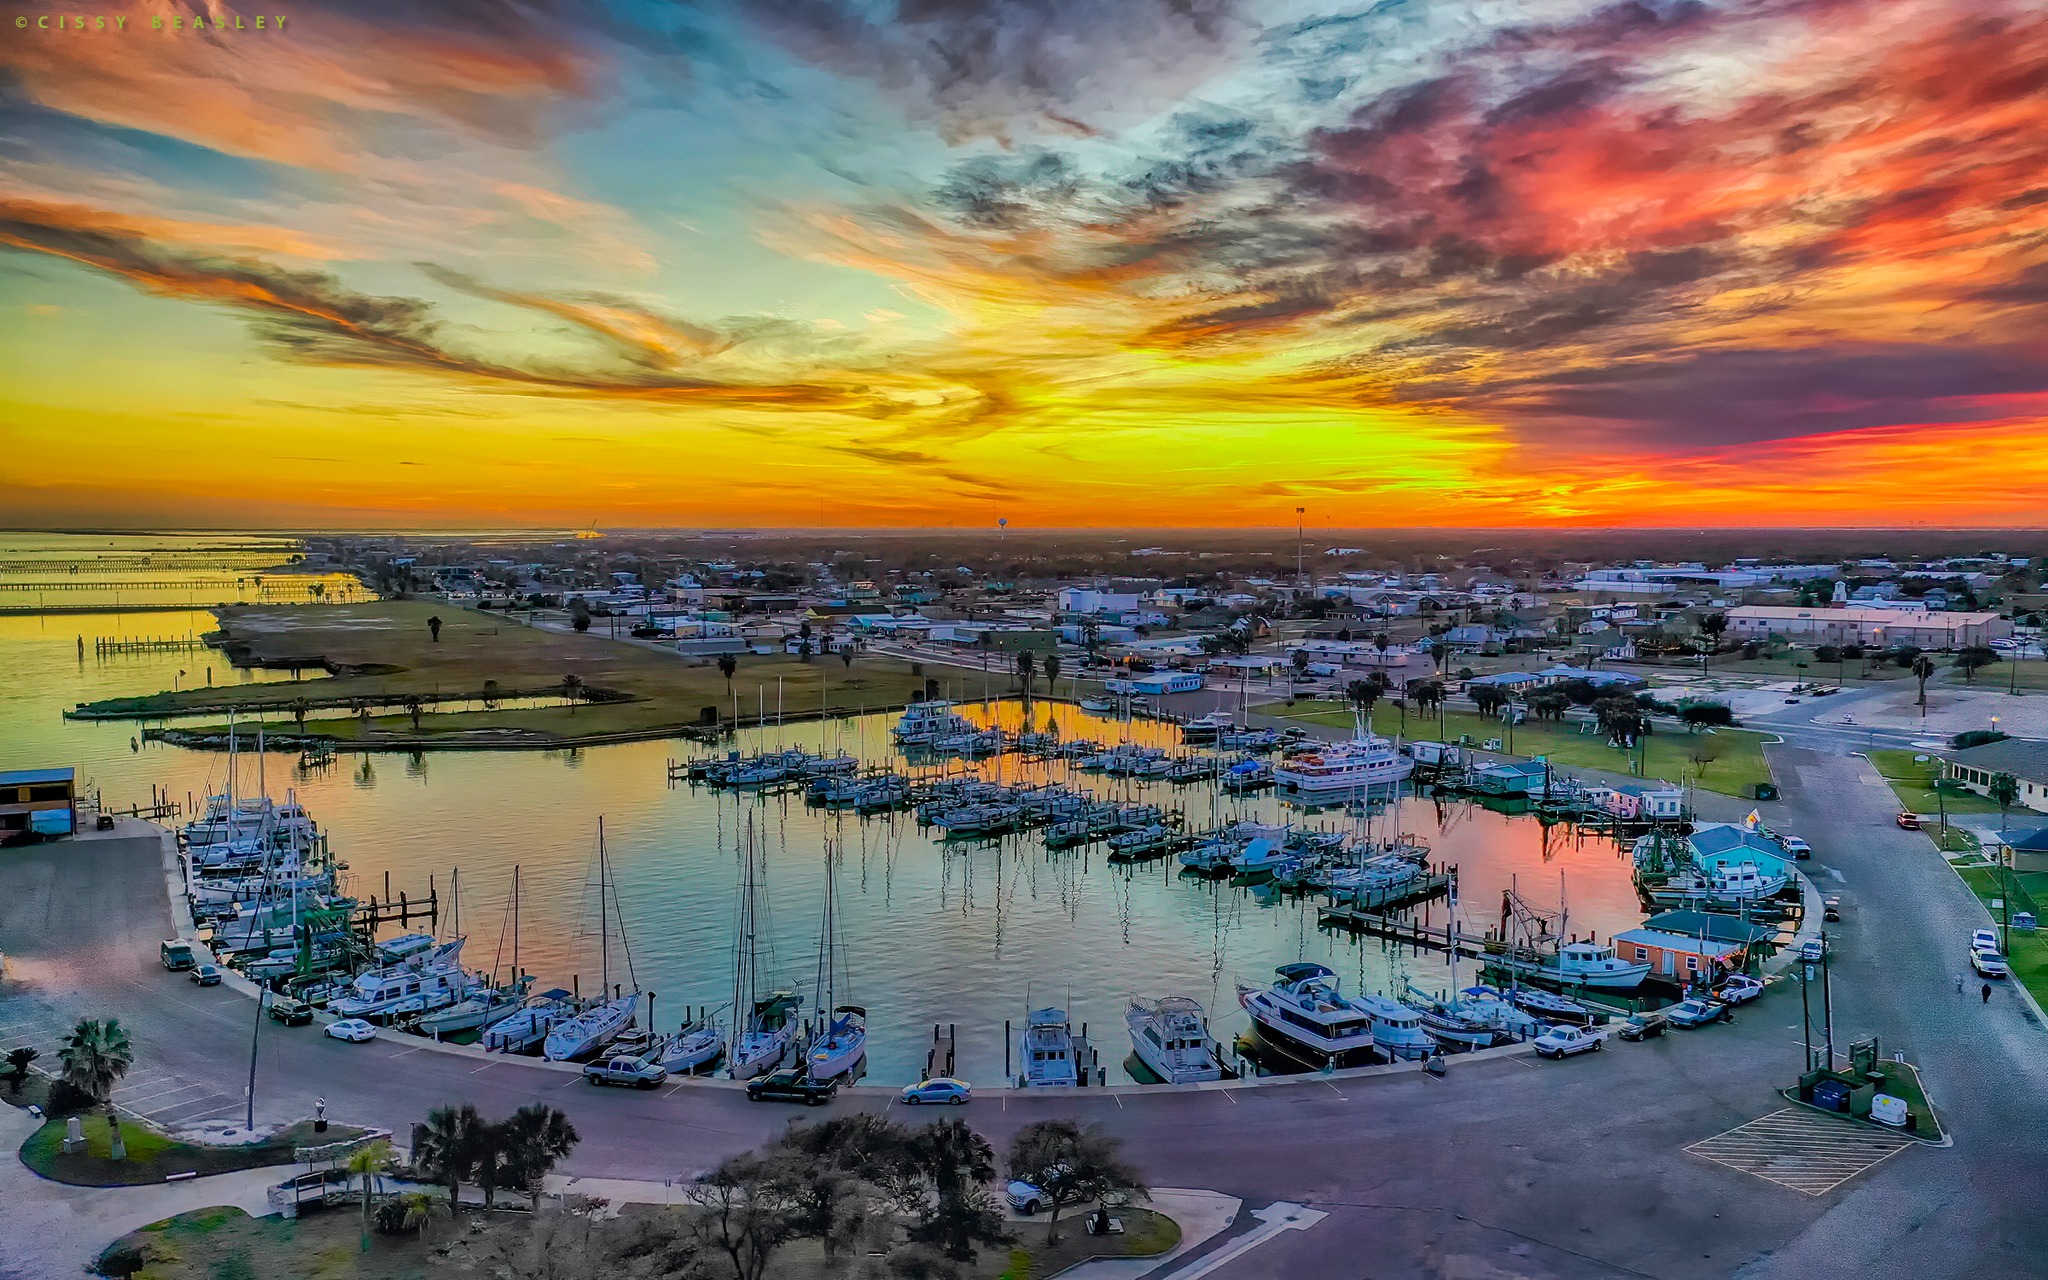 Most affordable beach towns in the us: Rockport Texas